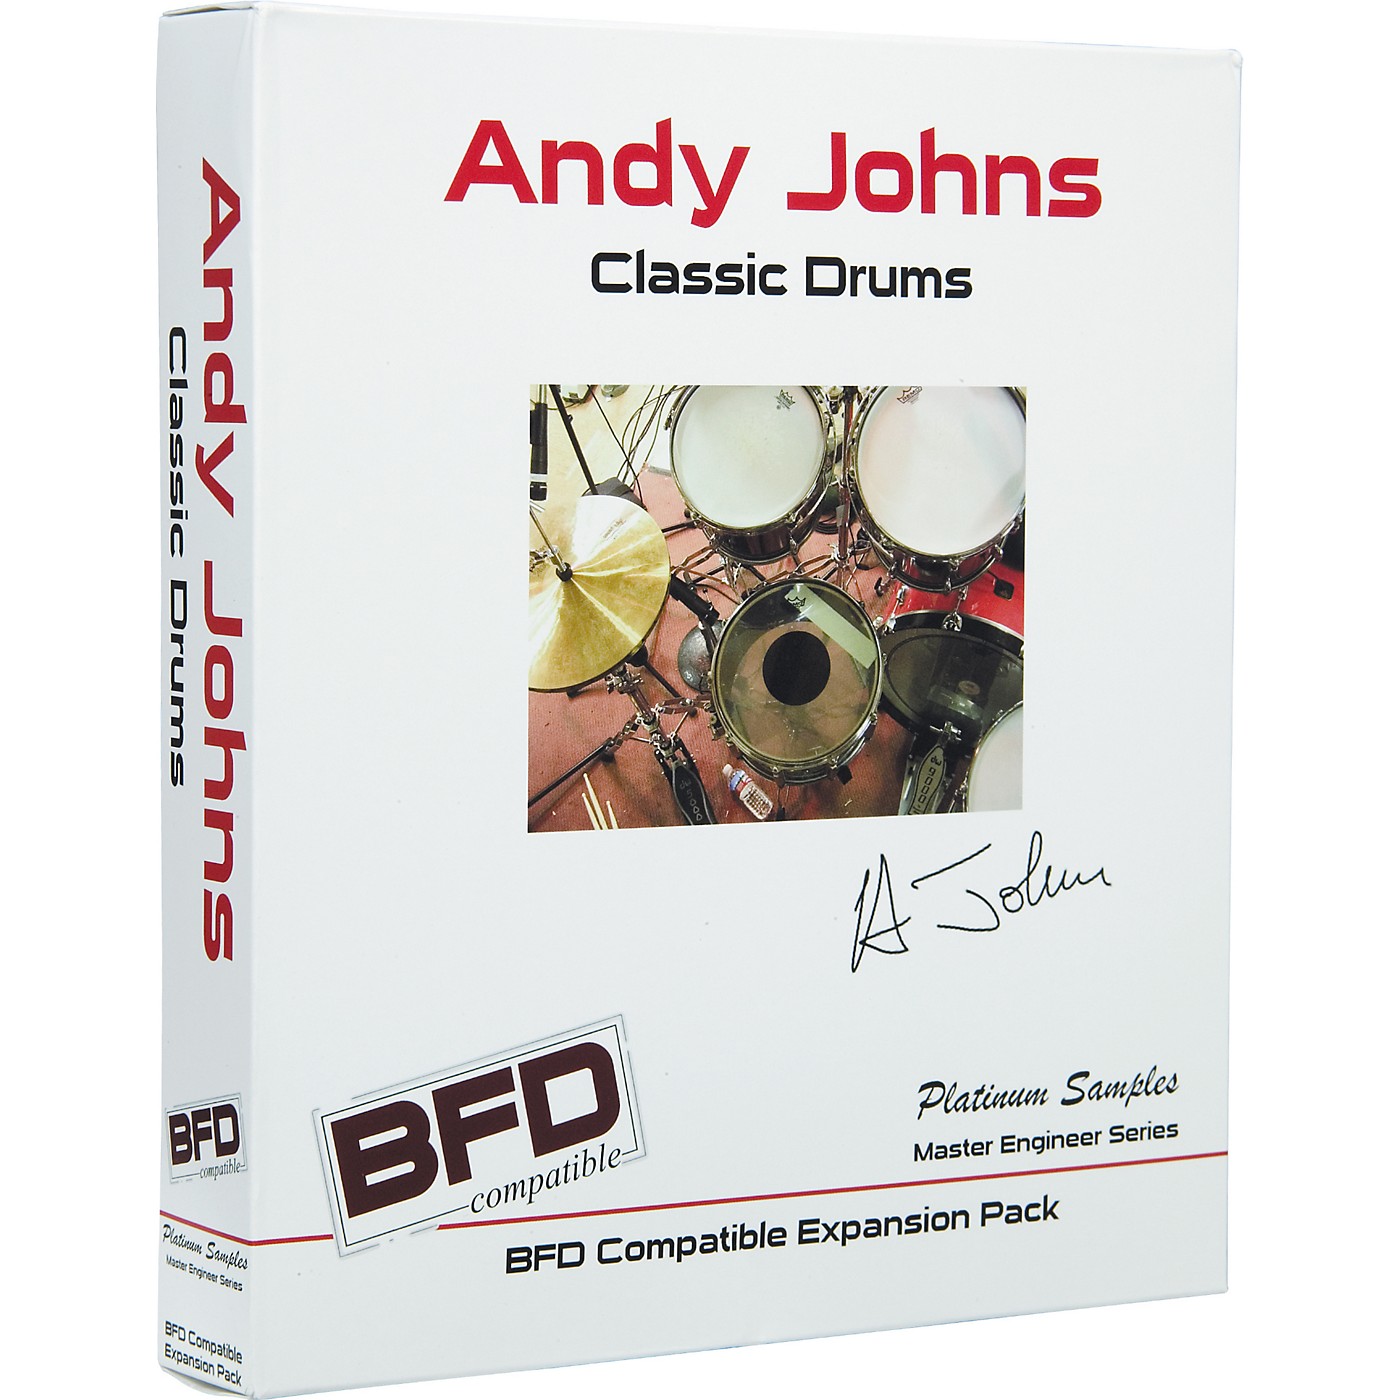 Platinum Samples Andy Johns Classic Drums for BFD thumbnail